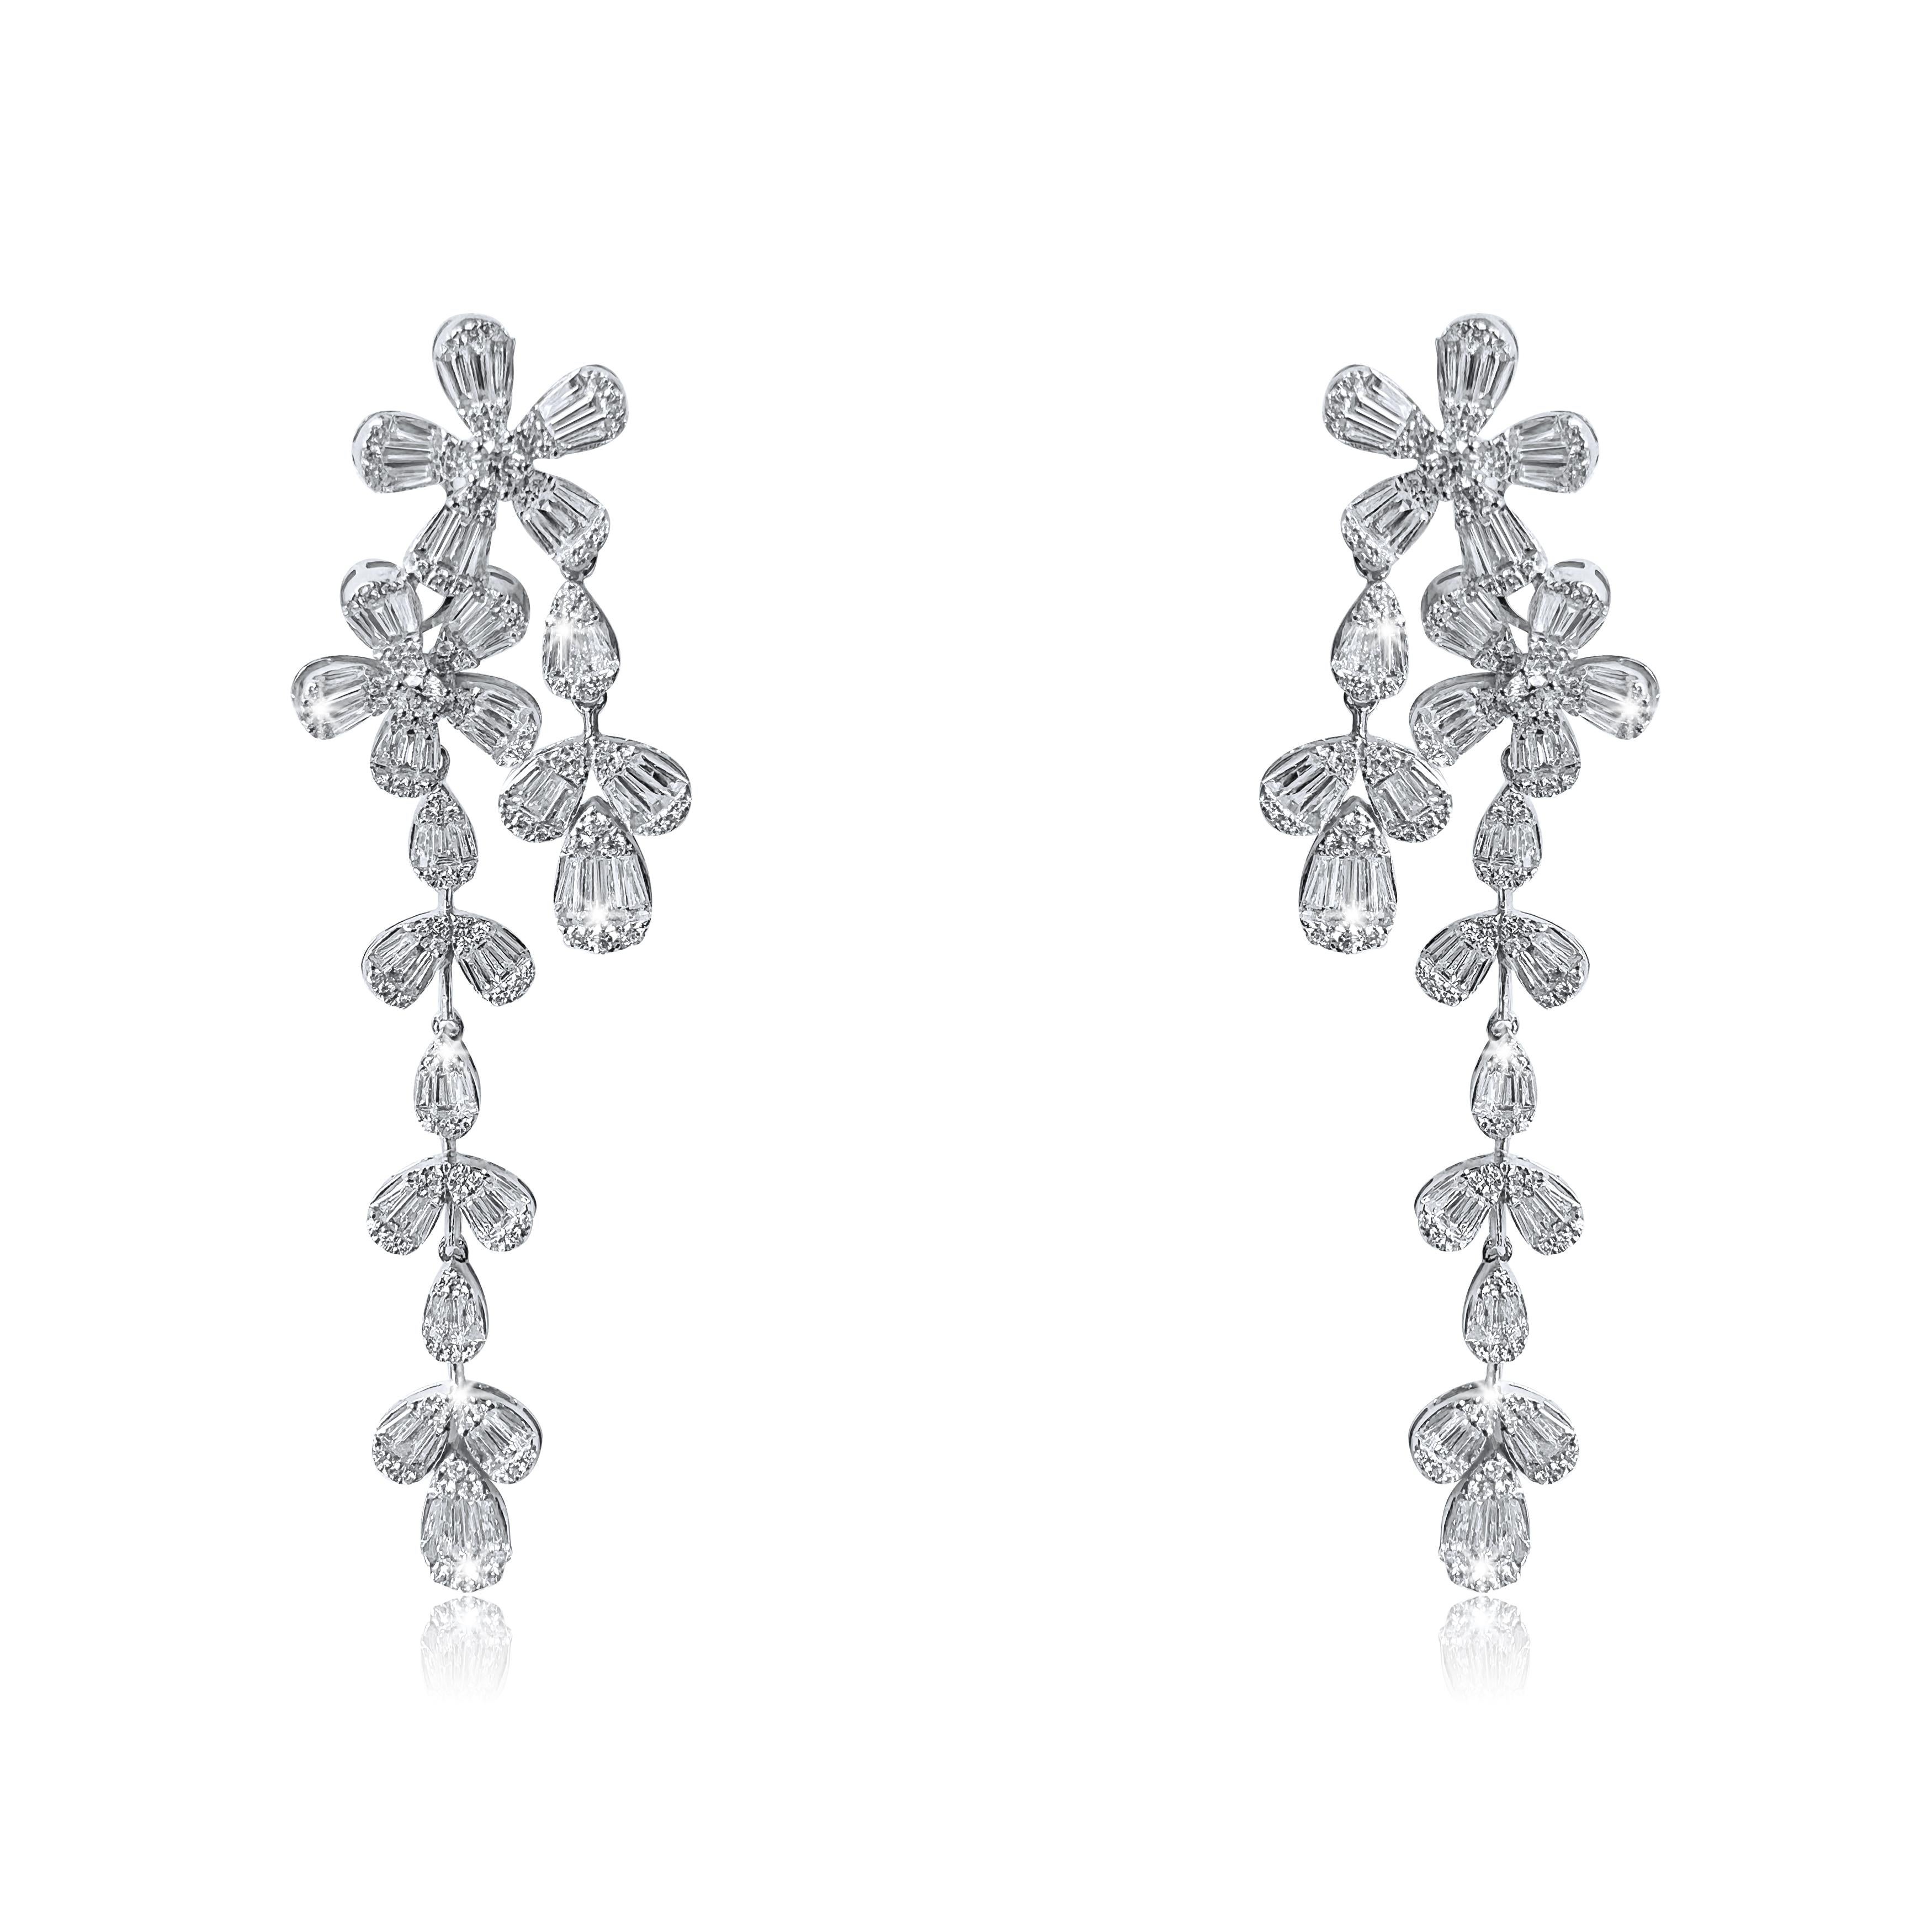 Earrings Information
Metal Purity : 18K
White Gold
Gold Weight : 19.47g
Length : 3''
Diamond Count : 292 Round Diamonds
Round Diamond Carat Weight : 1.72 ttcw
Baguette Diamonds Count : 148
Baguette Diamonds Carat Weight : 4.25 ttcw
Serial #EA15374

